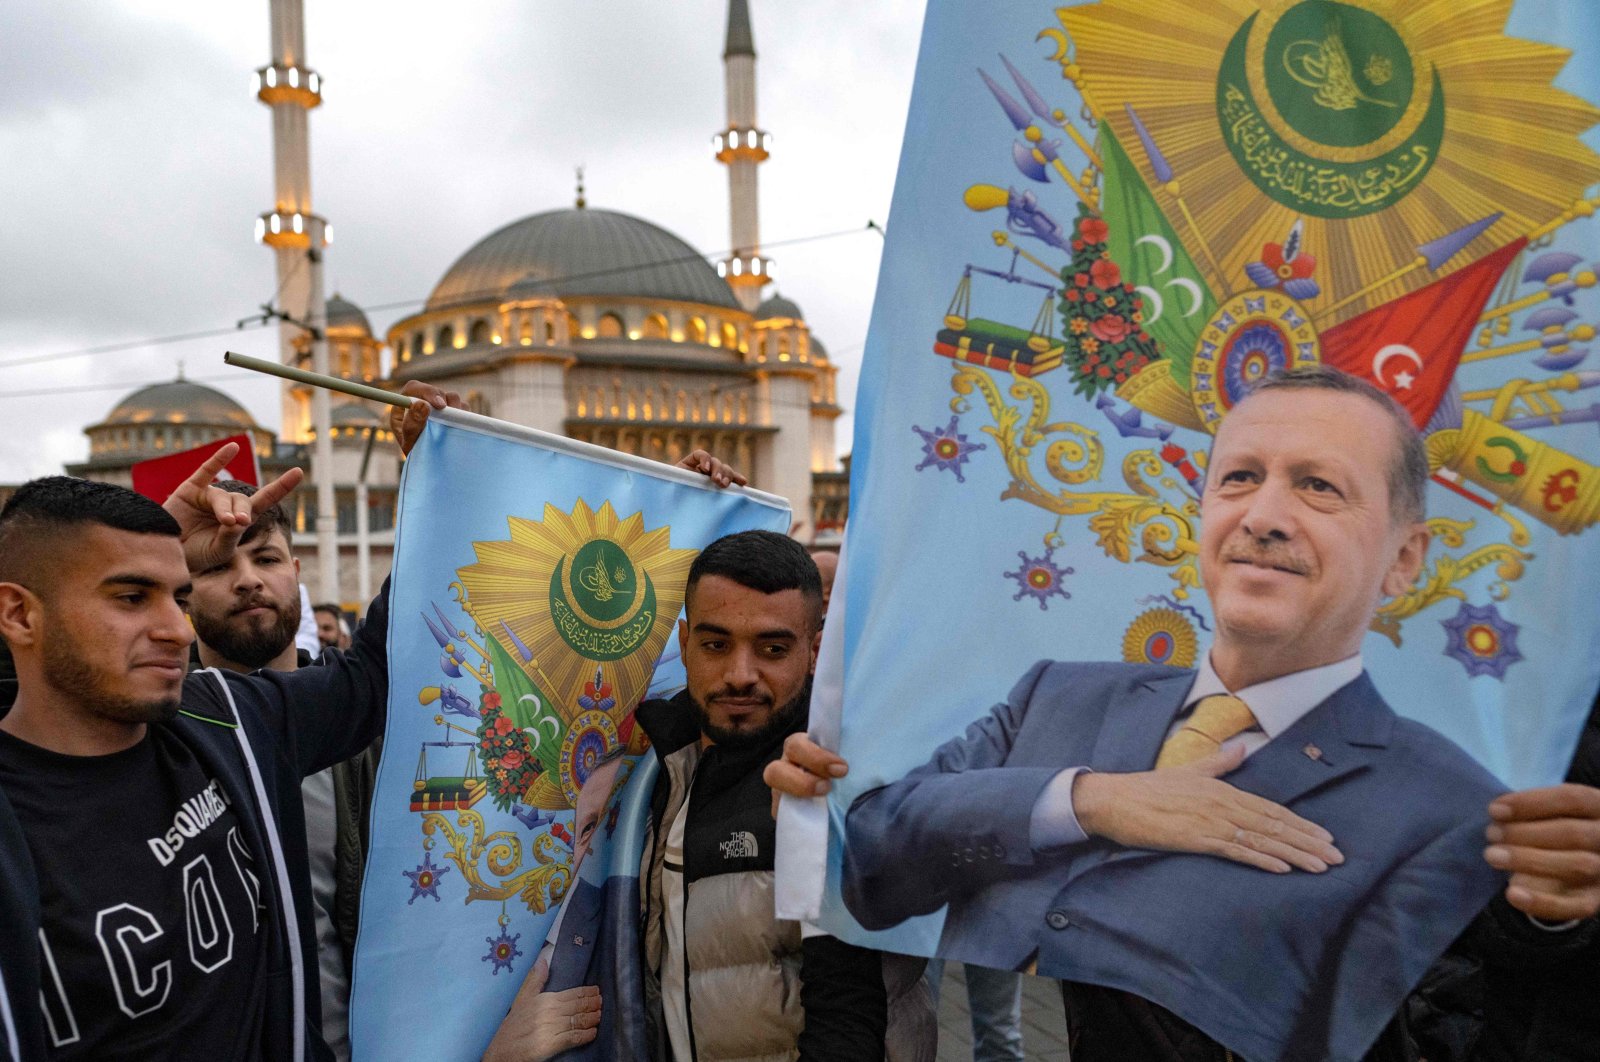 Supporters of President Recep Tayyip Erdoğan celebrate near Taksim Mosque at the Taksim Square in Istanbul on the day of the presidential runoff vote in Istanbul, May 28, 2023. (AFP Photo)